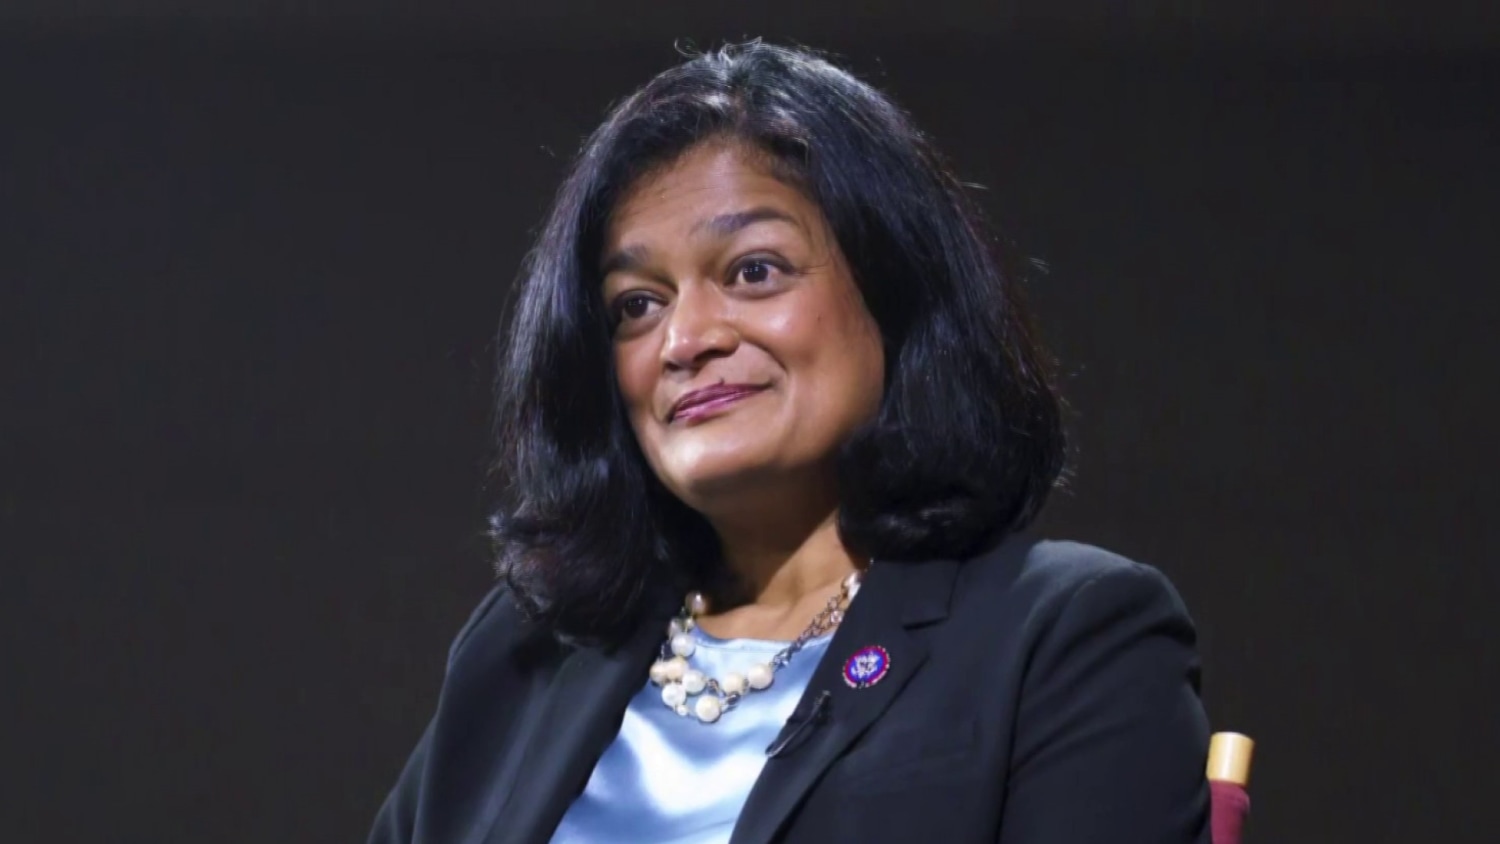 Washington Today (7/17/2023): Rep. Jayapal walks back her comments calling Israel a ‘racist state’